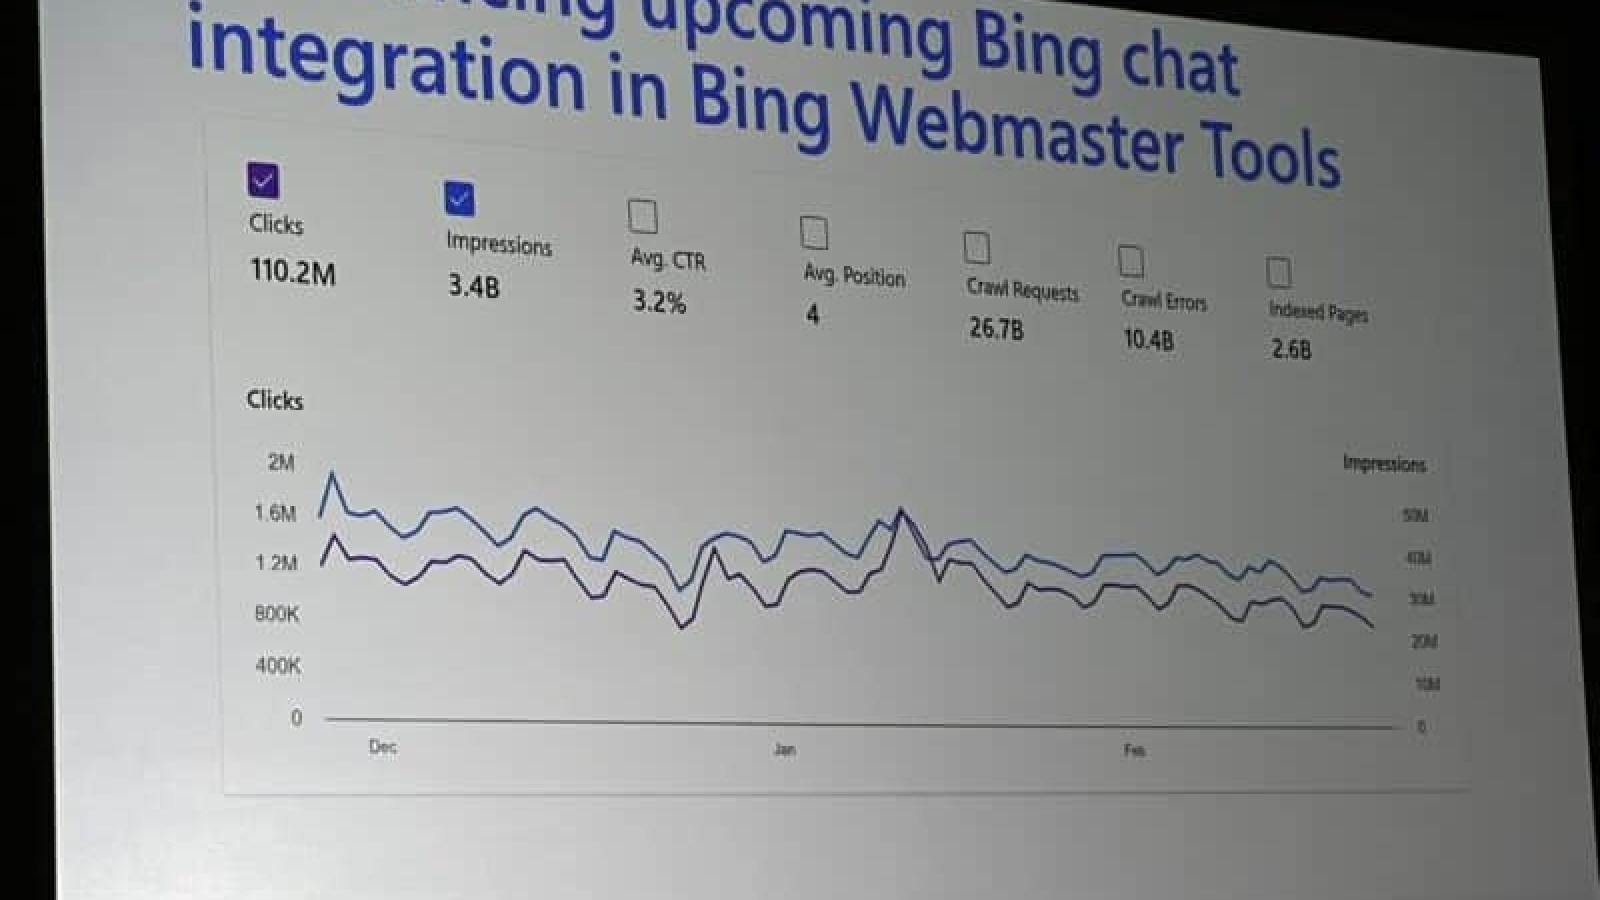 Bing Webmaster Tools to gain Bing Chat impressions and clicks next month